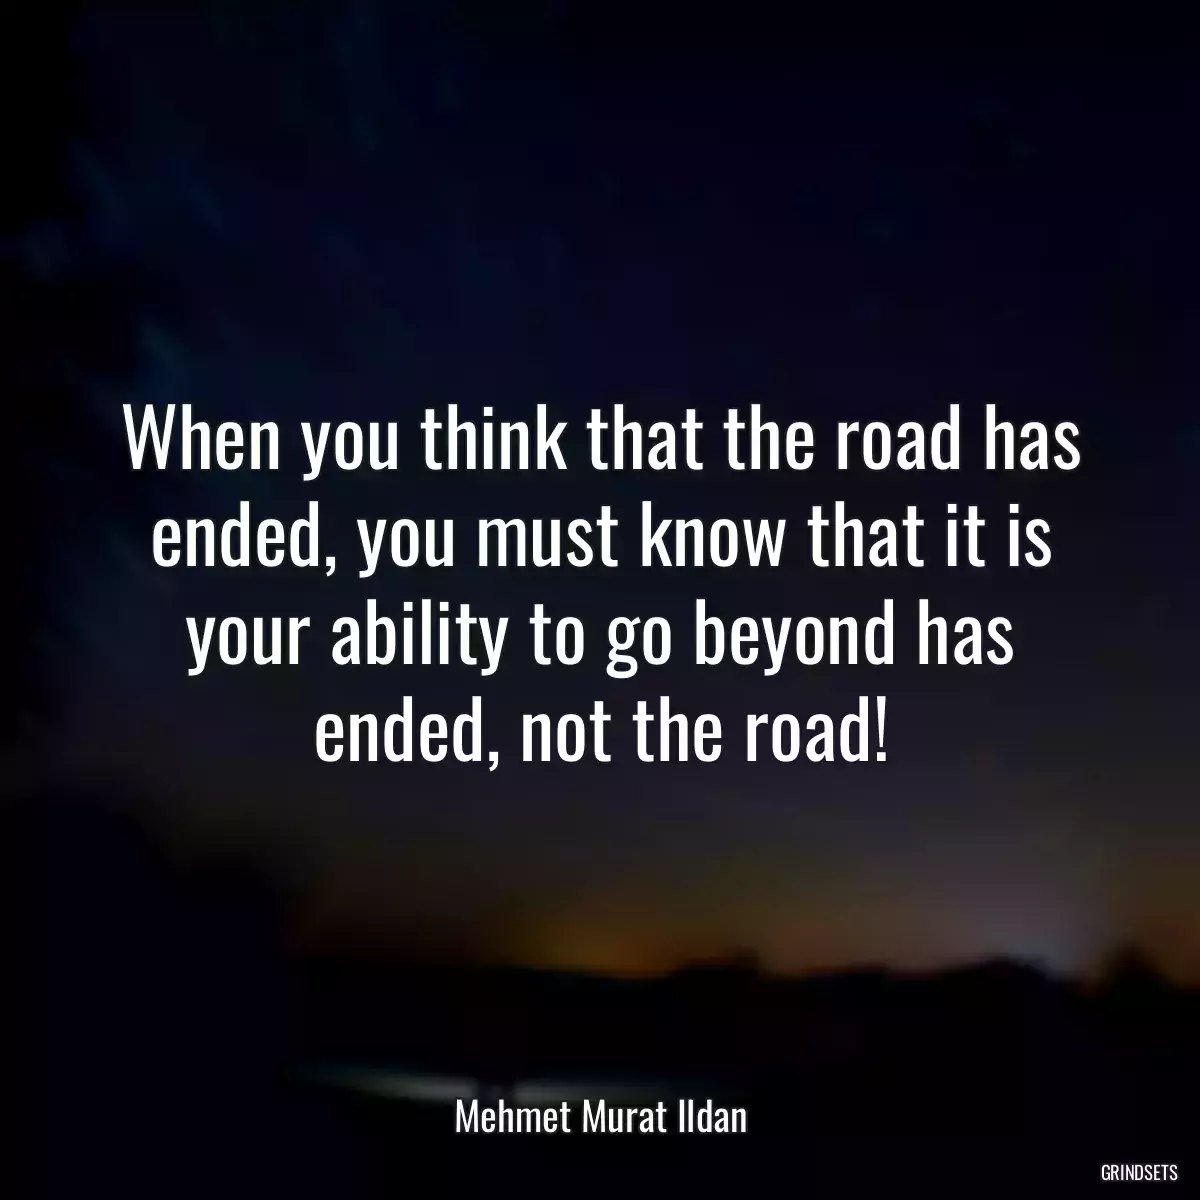 When you think that the road has ended, you must know that it is your ability to go beyond has ended, not the road!